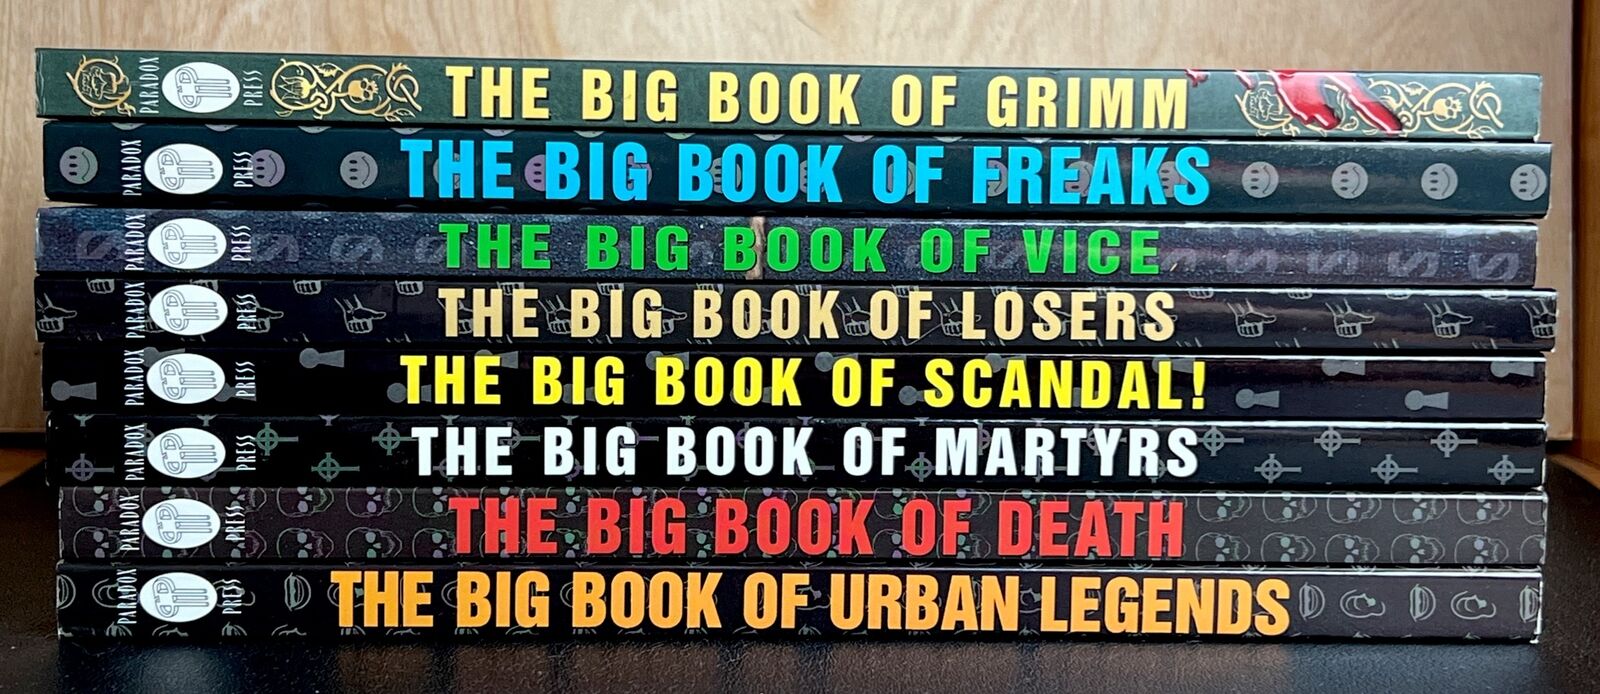 LOT 8 The Big Book Of (Factoid Books) Comic Books ~ Grimm, Freaks, Death, Losers